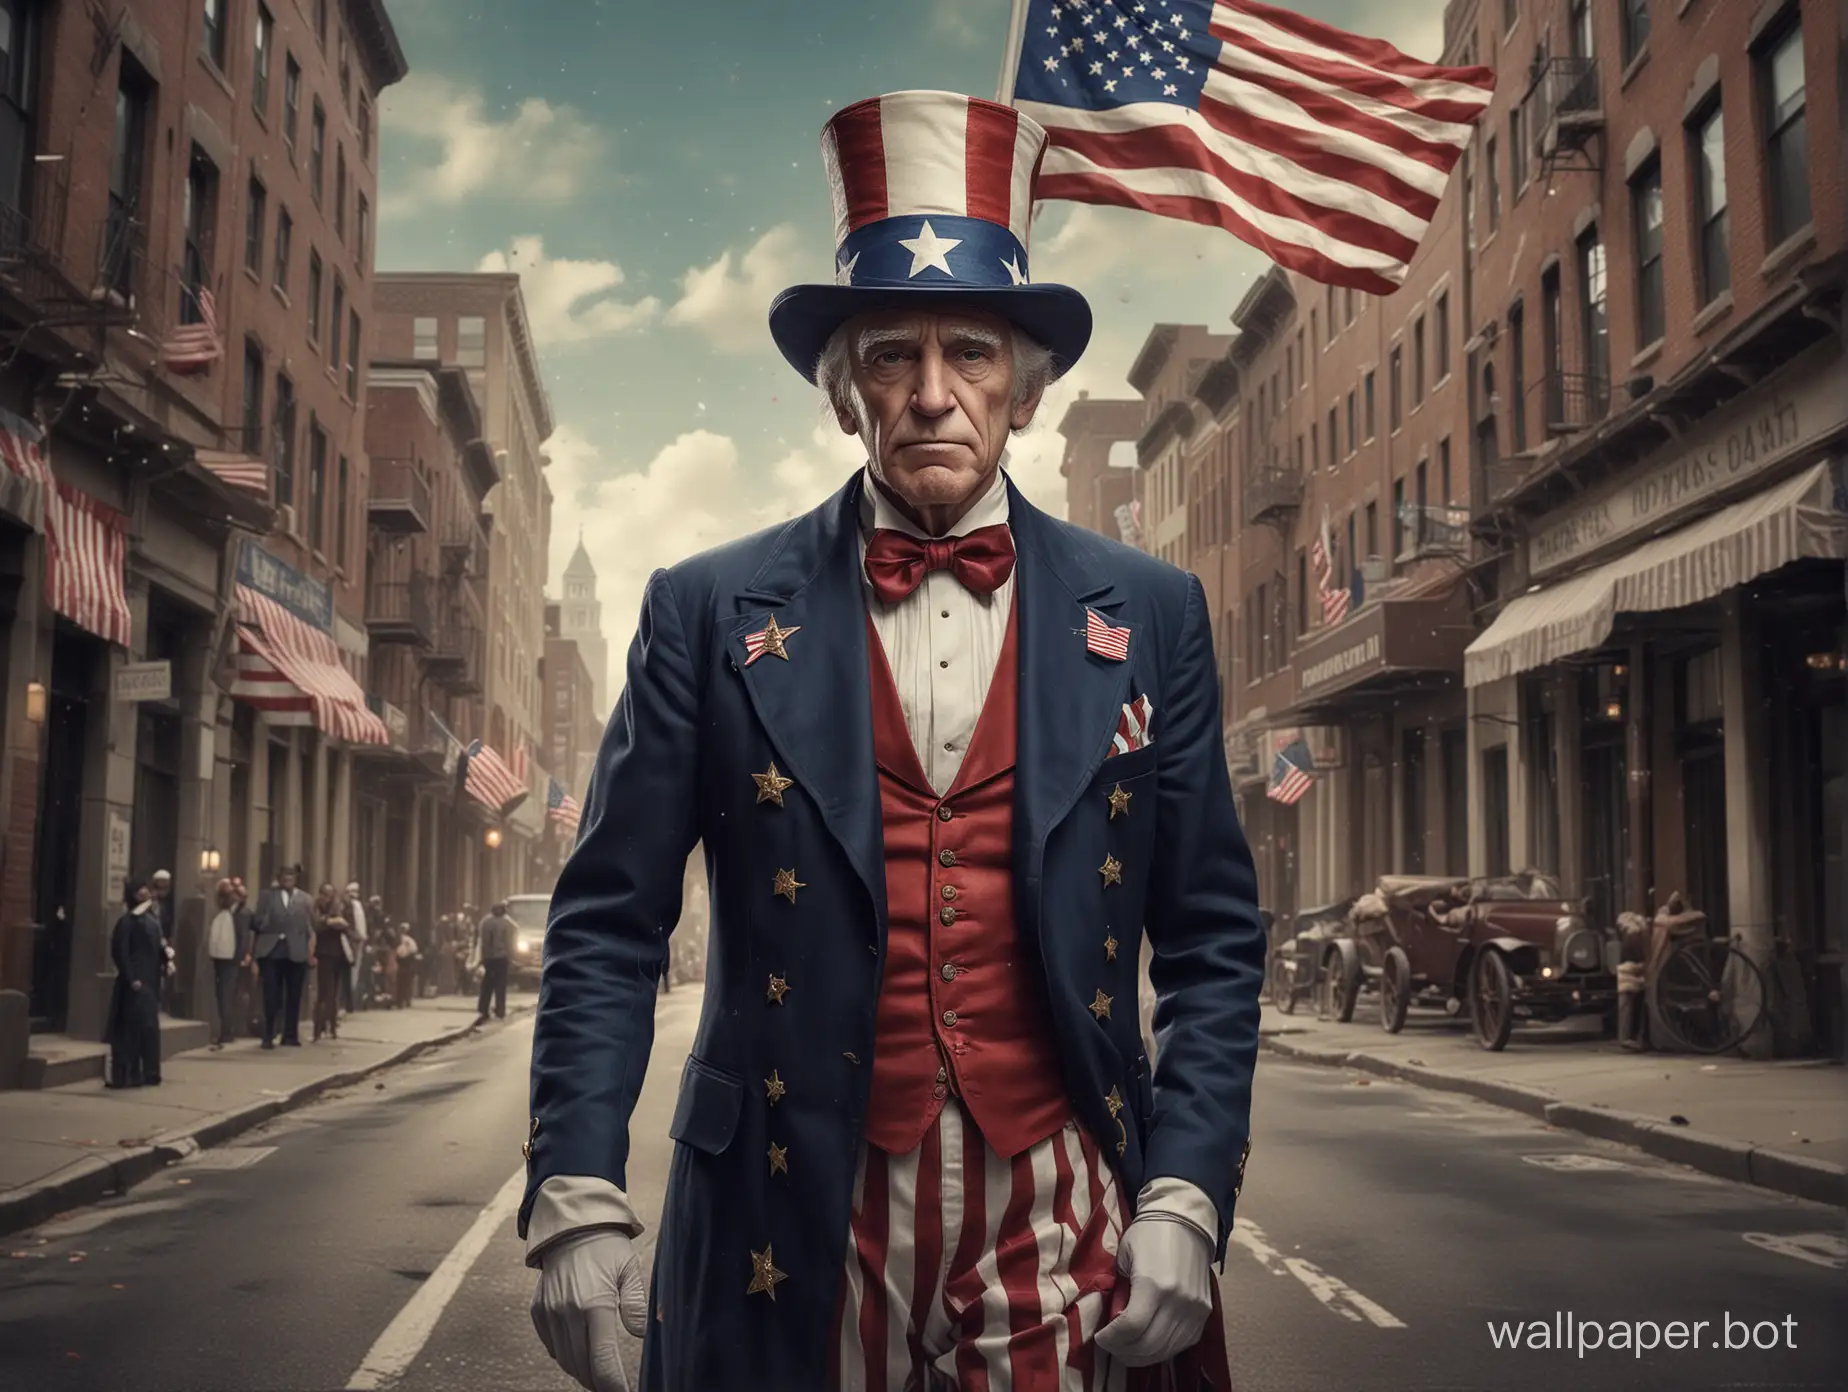 Uncle-Sam-in-Urban-Landscape-Patriotic-Figure-in-City-Setting-with-Satirical-Twist